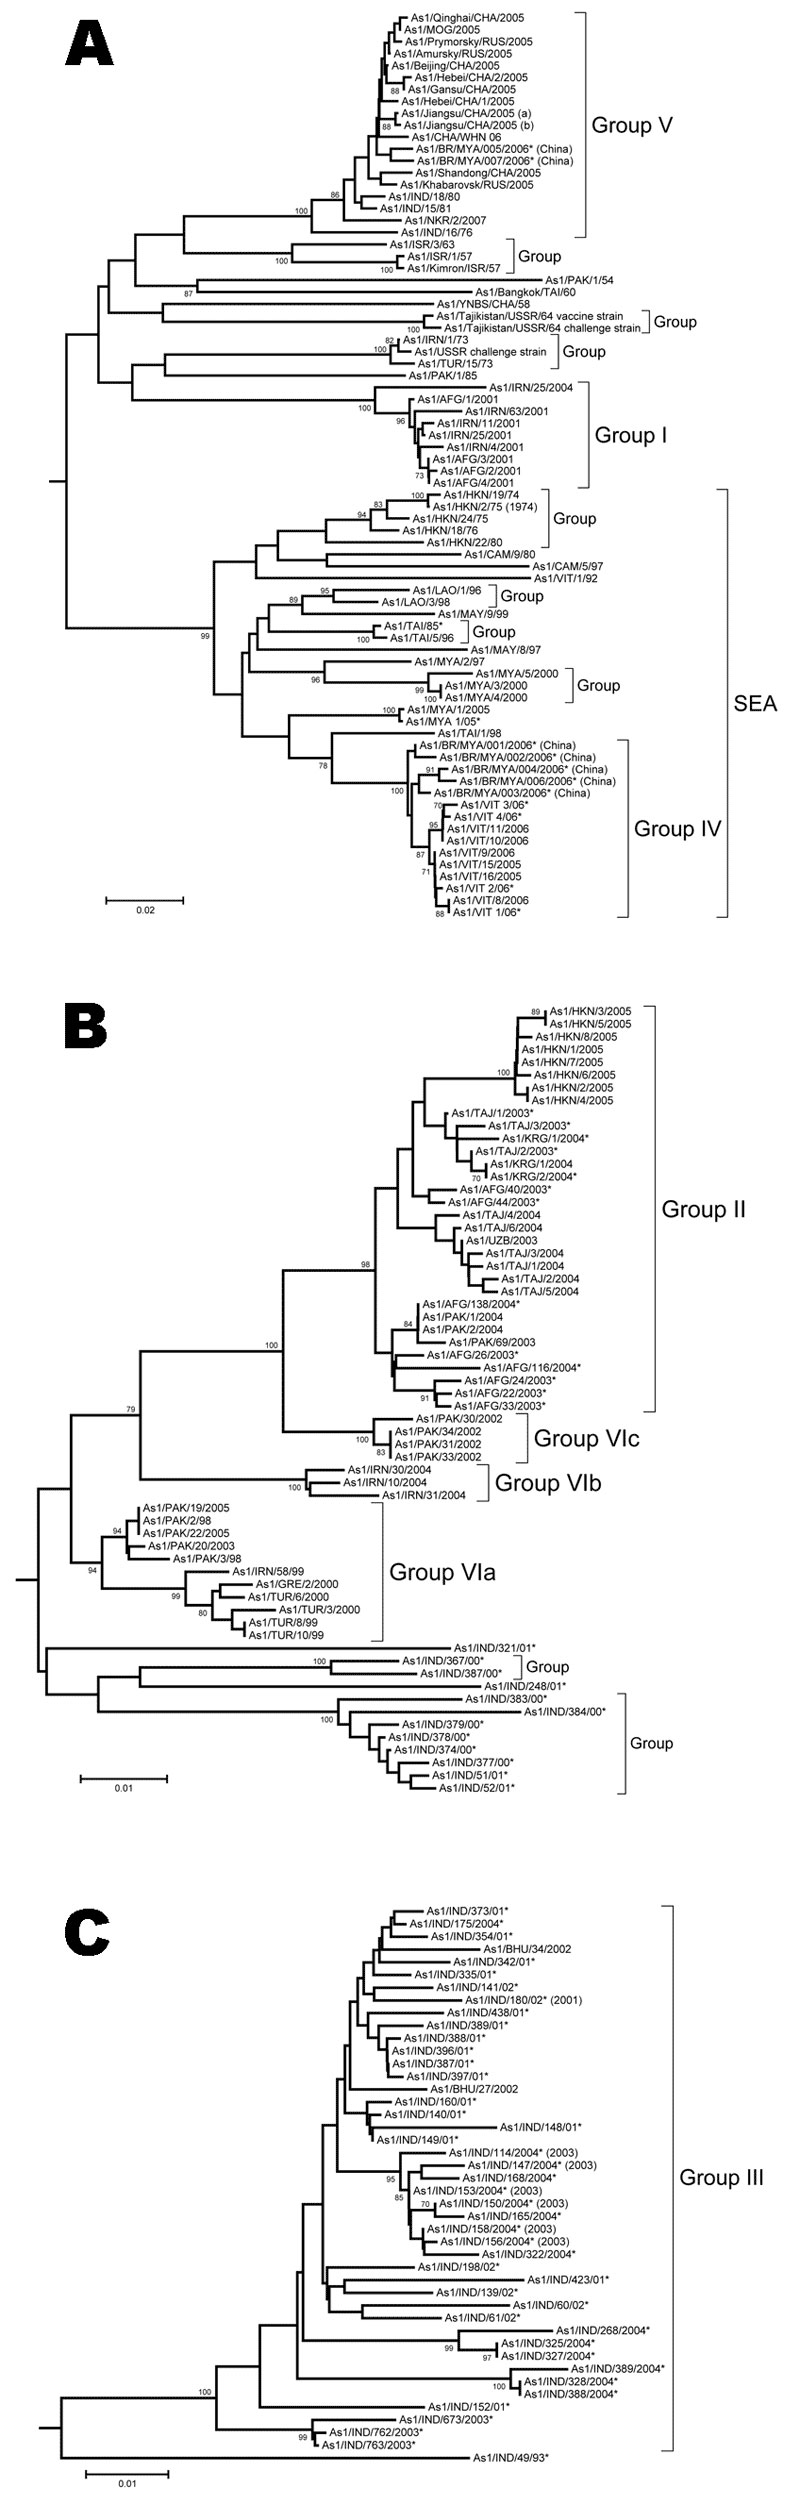 Midpoint-rooted neighbor-joining tree showing relationships between the foot-and-mouth disease Asia 1 viruses studied. A) groups I, IV, and V; B) groups II and VI; C) group III. Other groups of older (pre-2003) viruses sharing &gt;90% nucleotide identity are indicated by the word “group” without any number. Only bootstrap values &gt;70% are shown. Scale bars indicate nucleotide substitutions per site. SEA, group of viruses found in only in Southeast Asia and Hong Kong. *Indicates that the refere